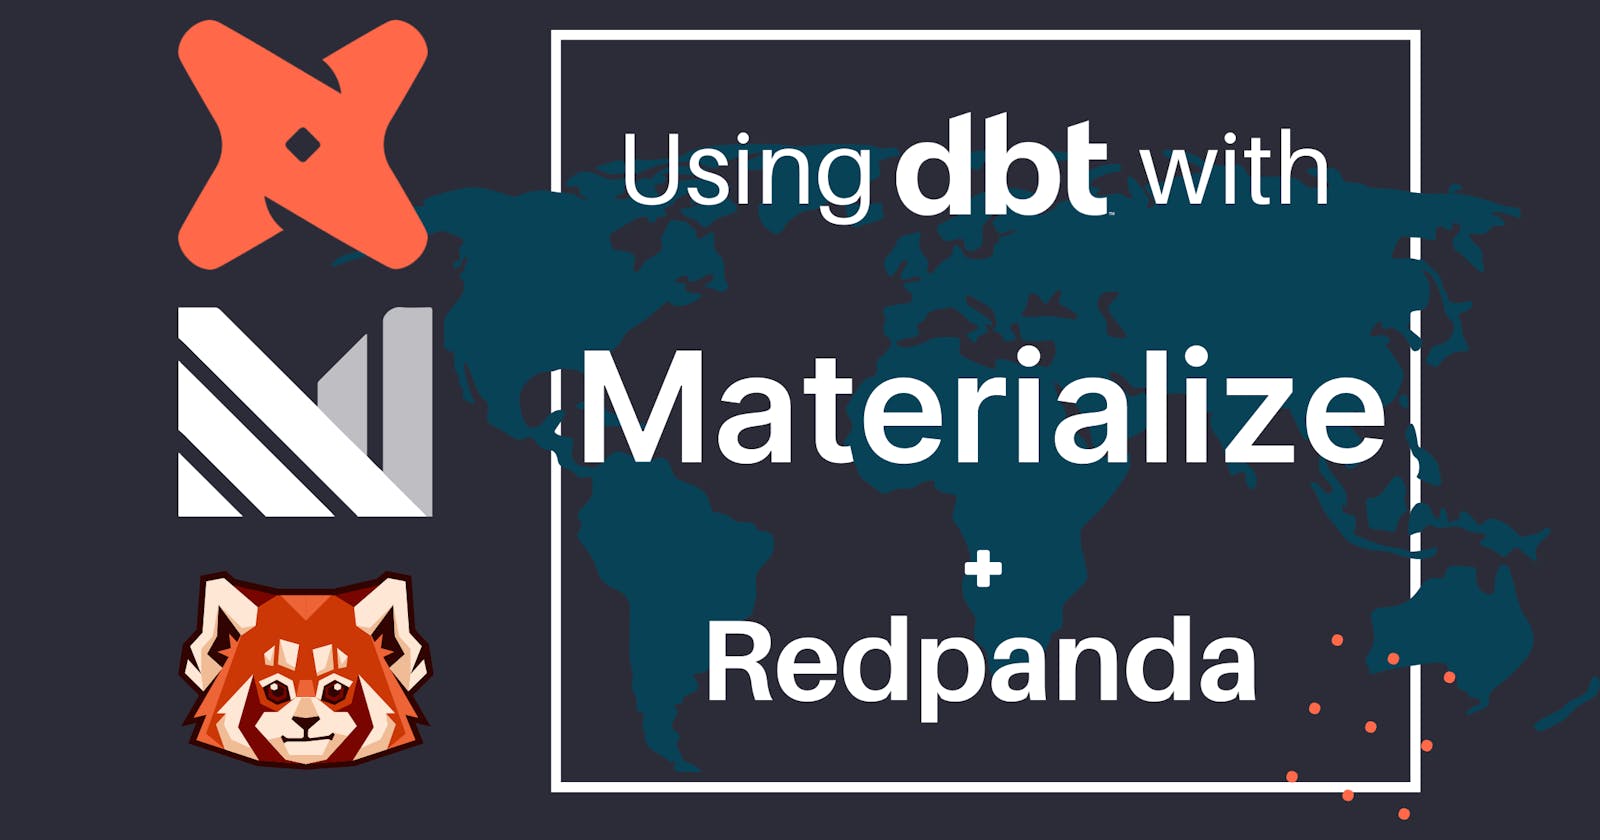 How to use dbt with Materialize and Redpanda